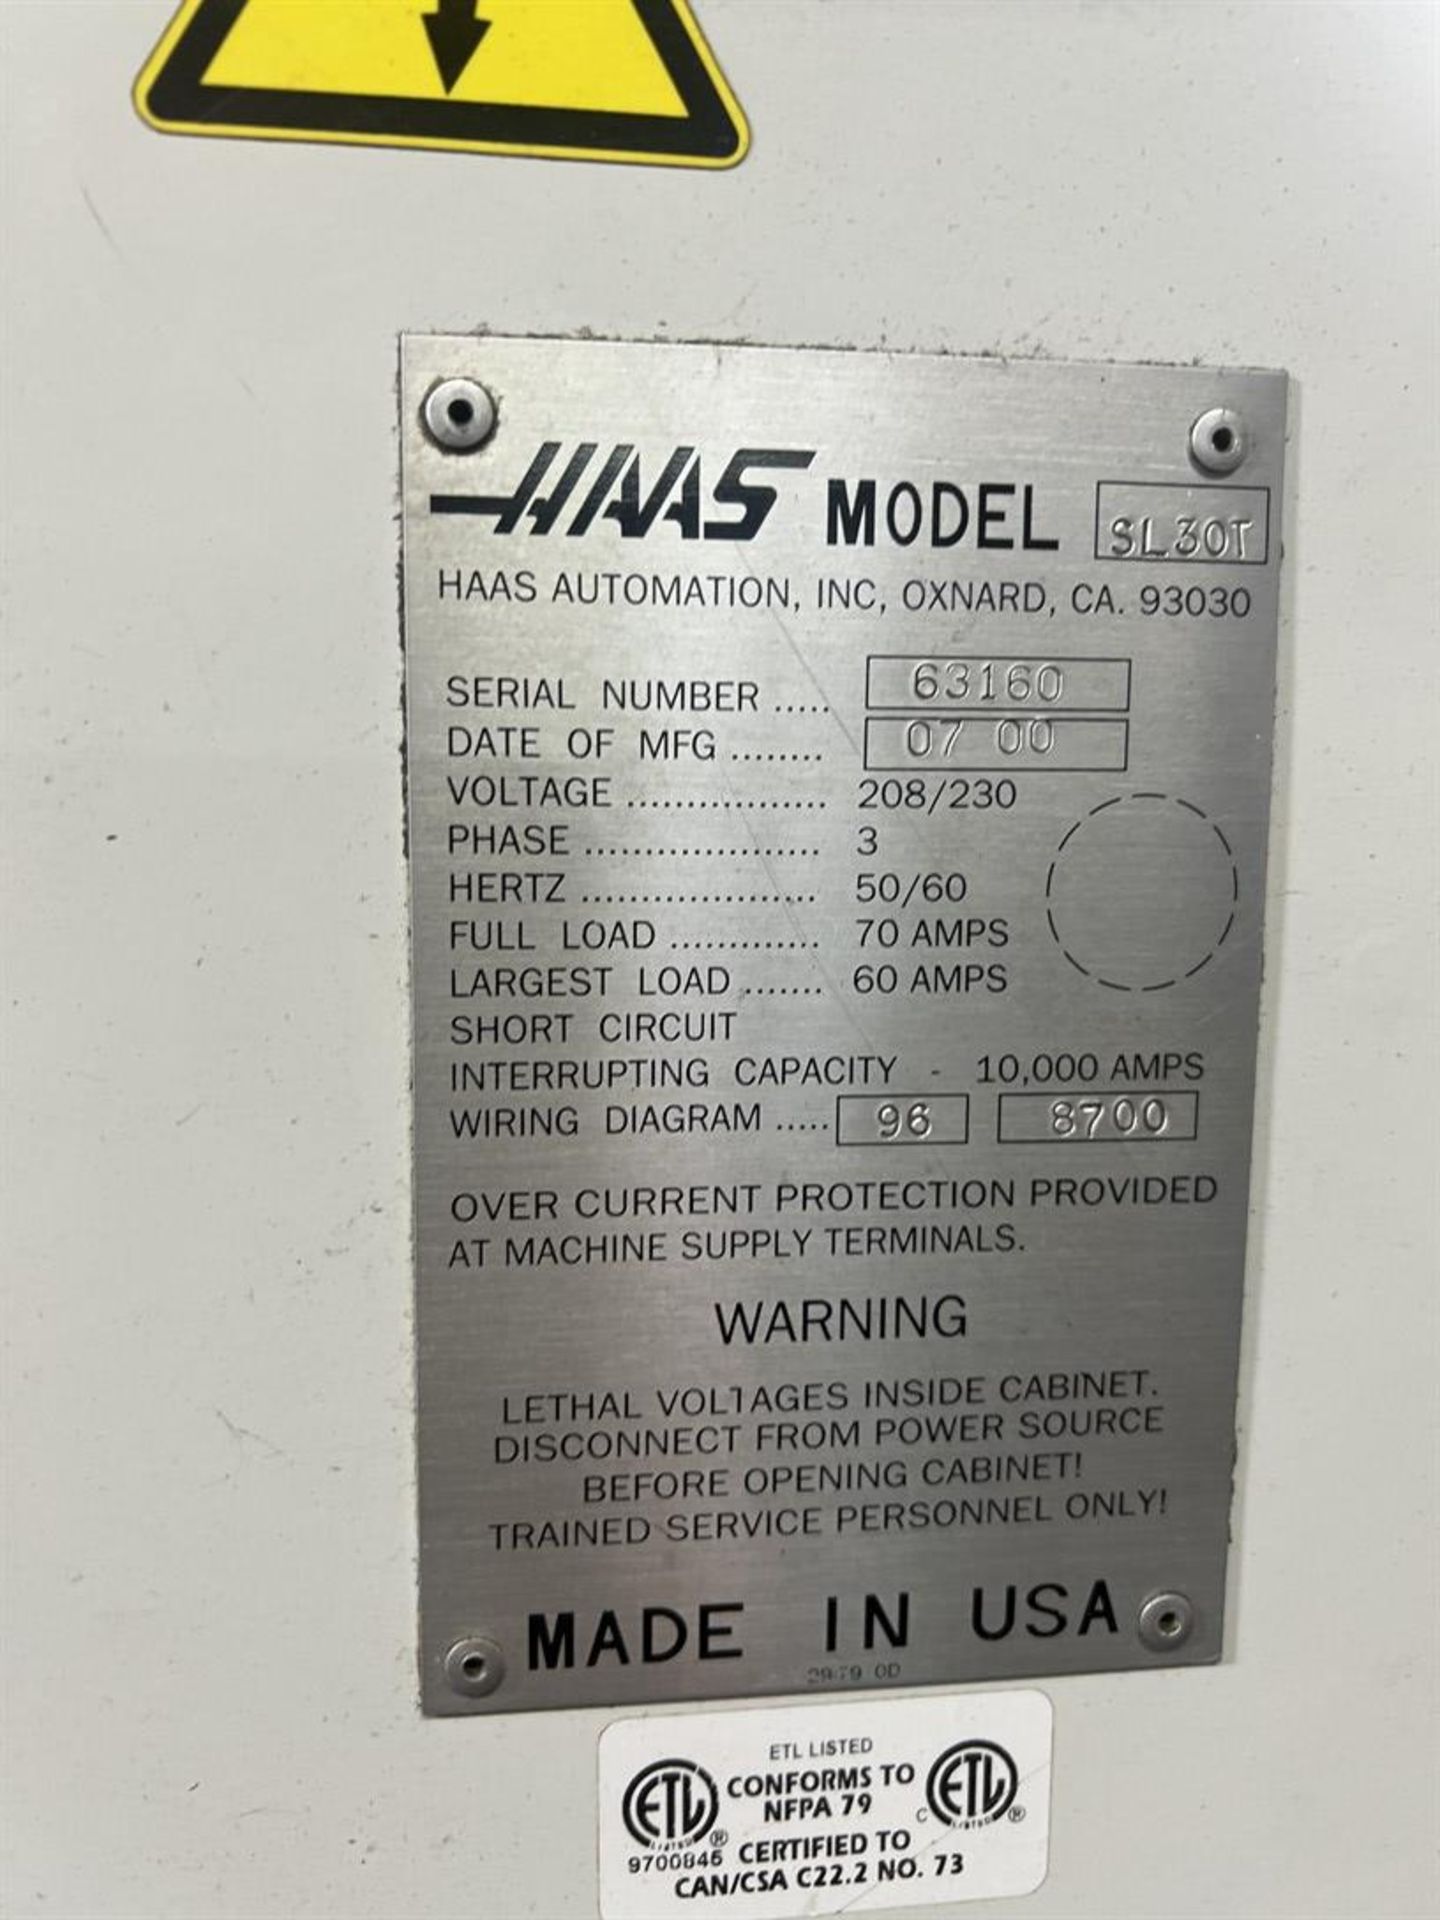 2000 HAAS SL-30T Turning Center, s/n 63160, HAAS CNC Control, 20.5” Max Swing, 32” Max Turning - Image 9 of 9